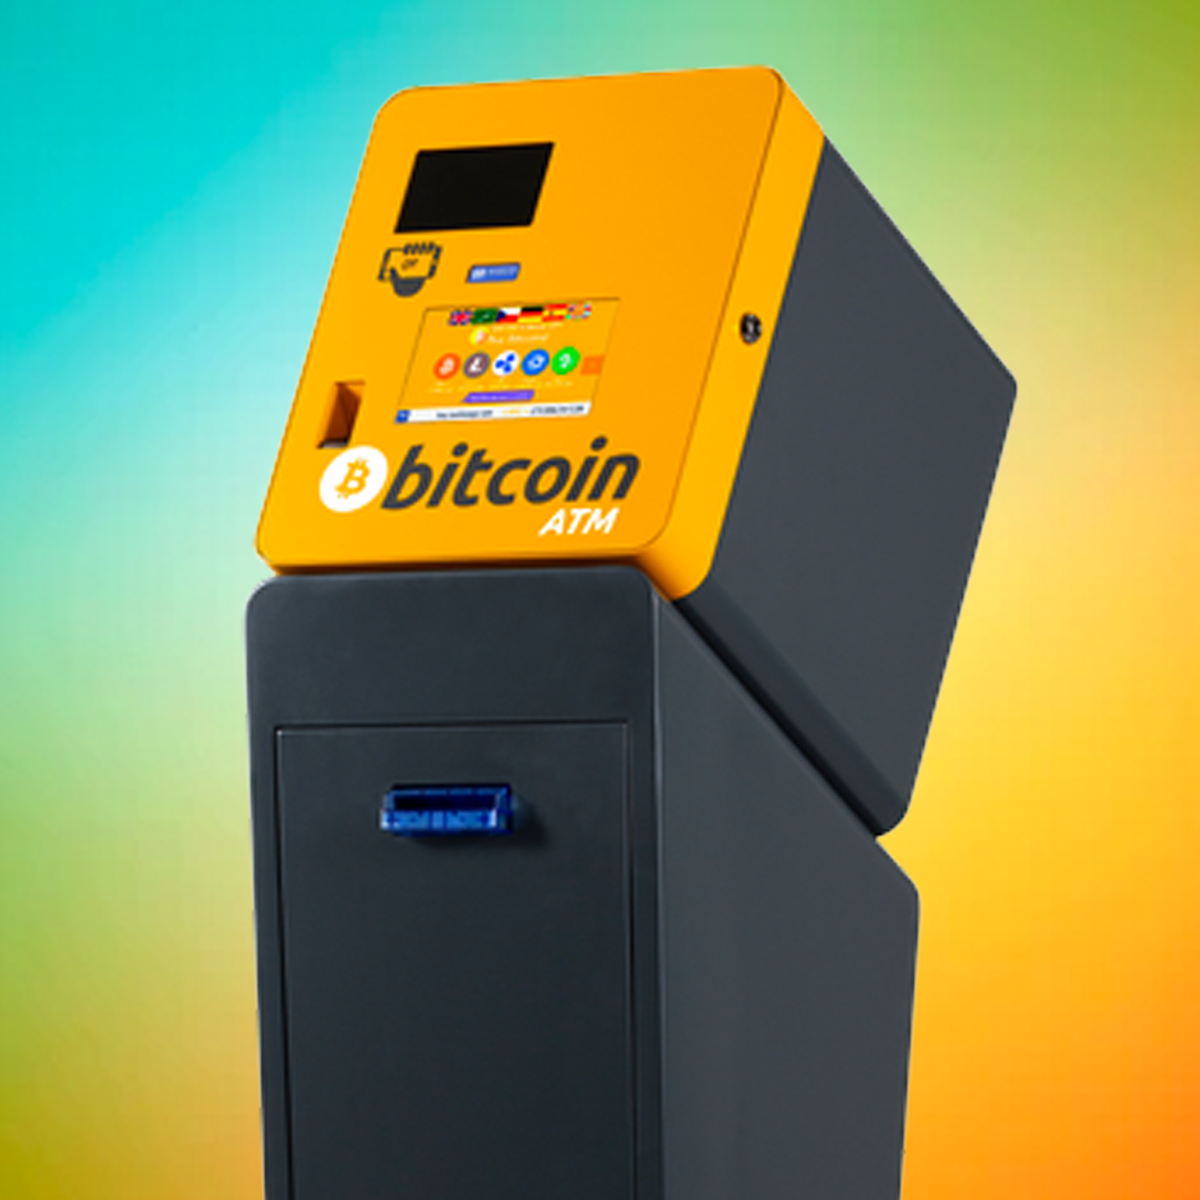 bitcoin atm limit per day in us